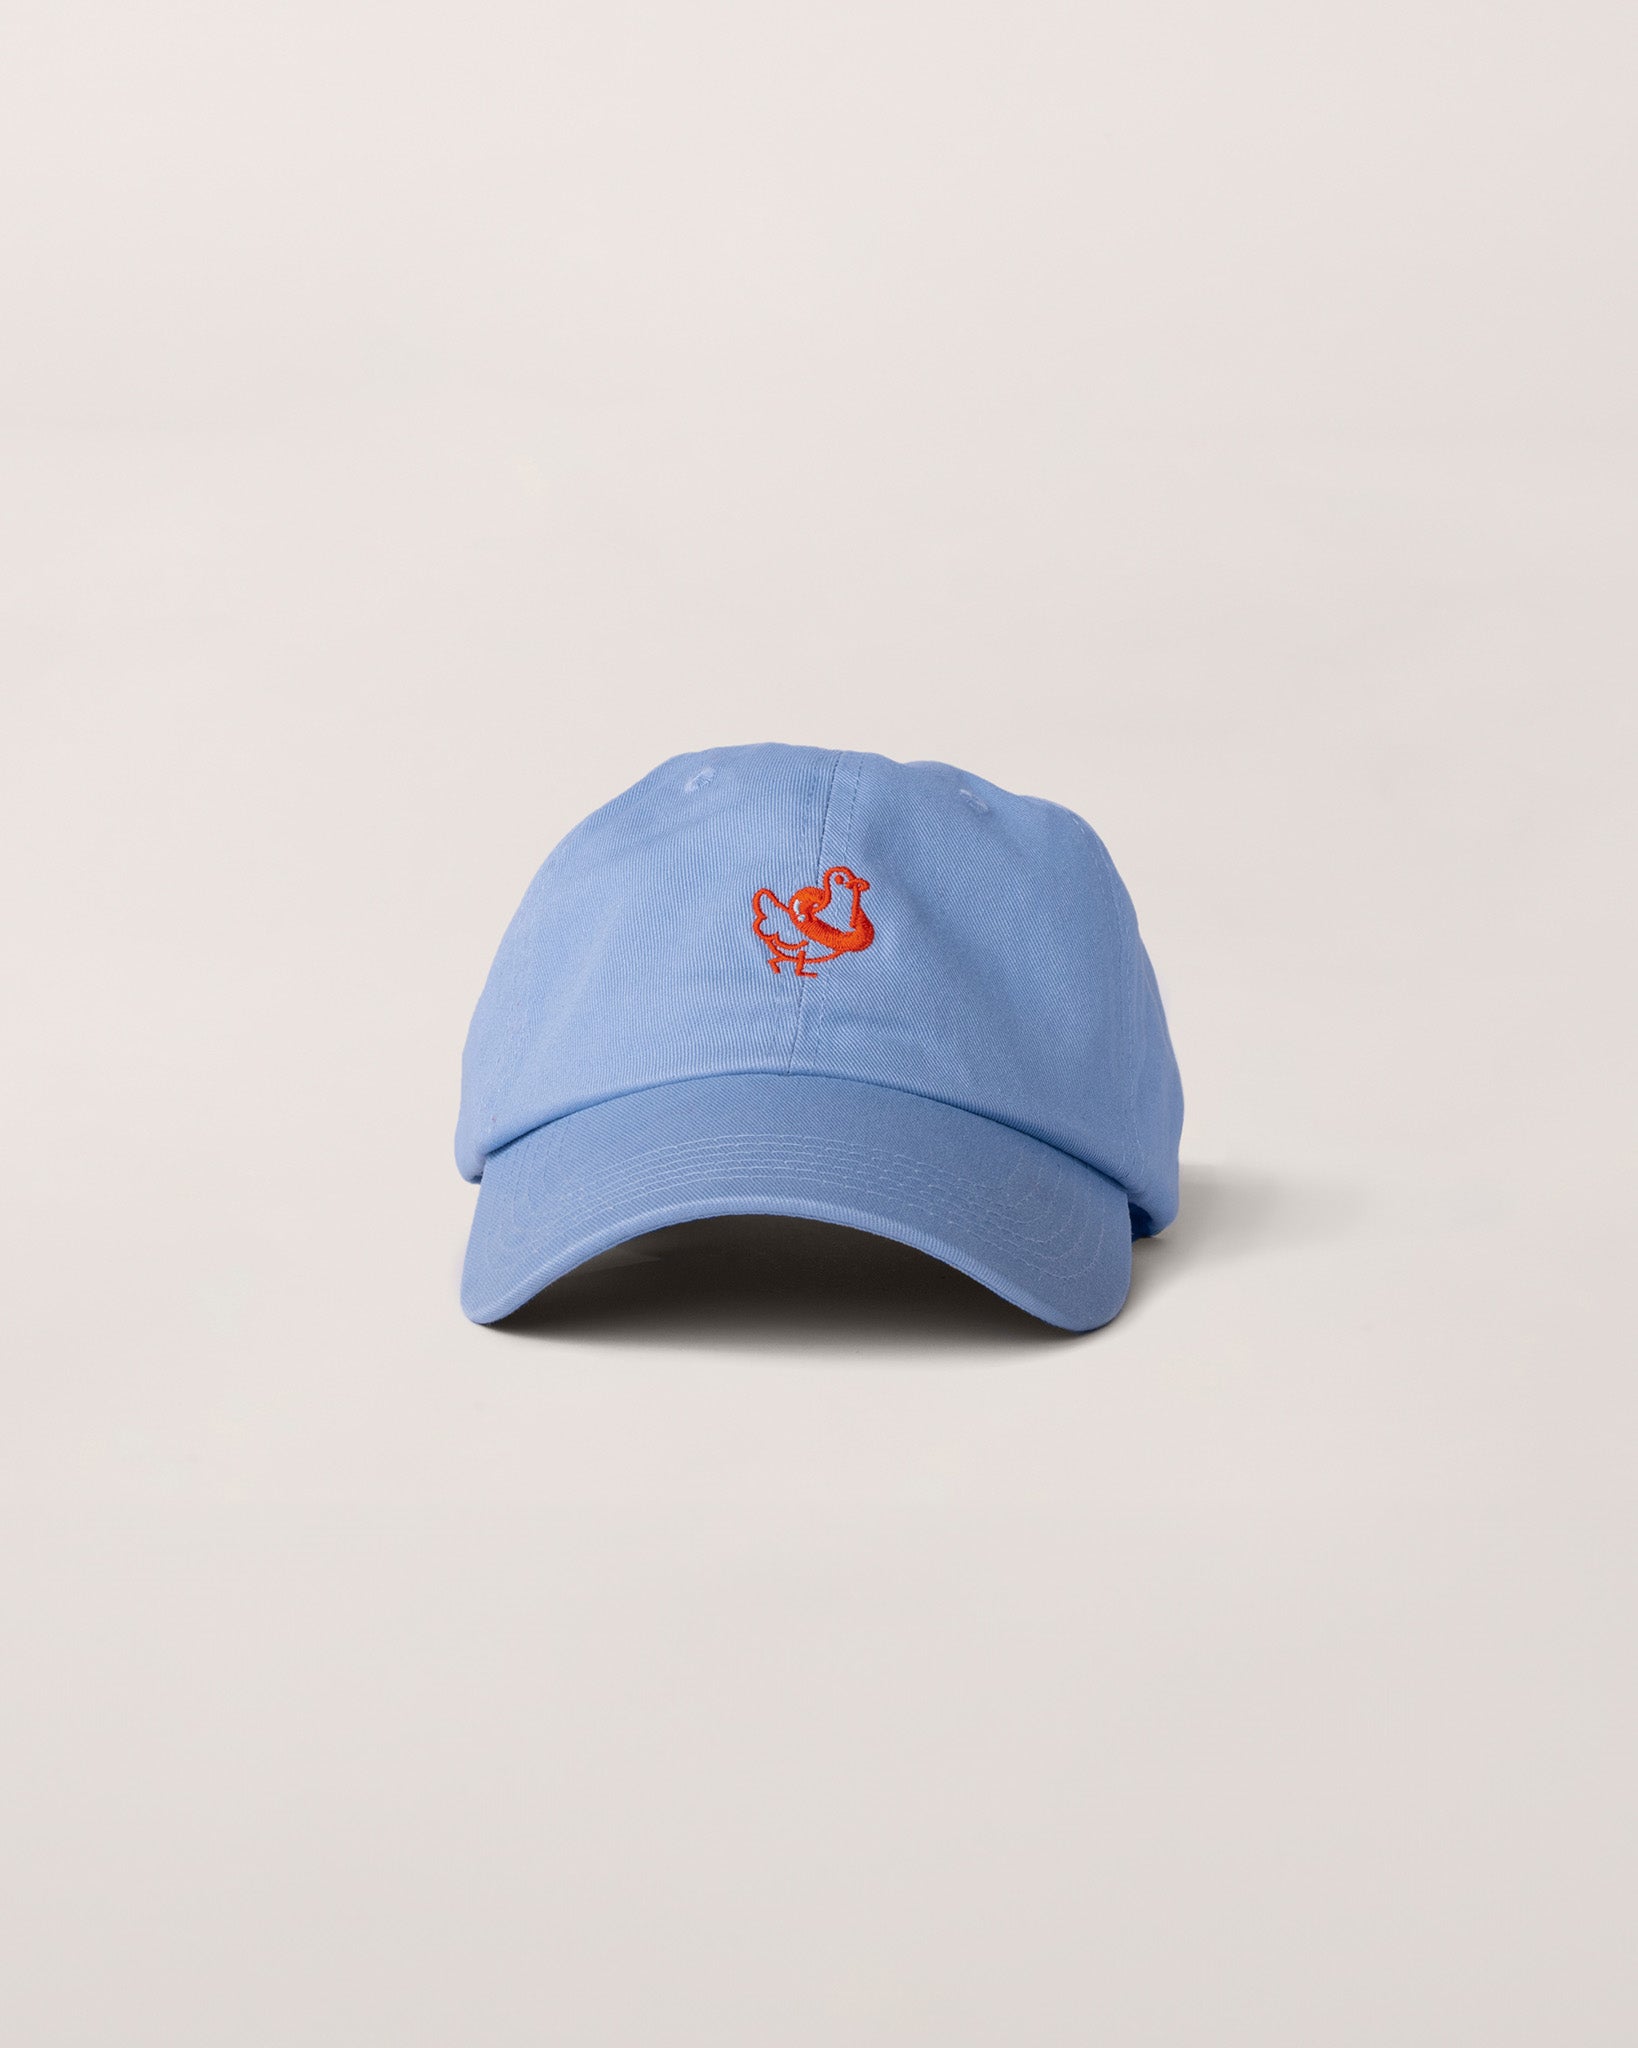 A baby blue hat with an orange Public Pool icon. 